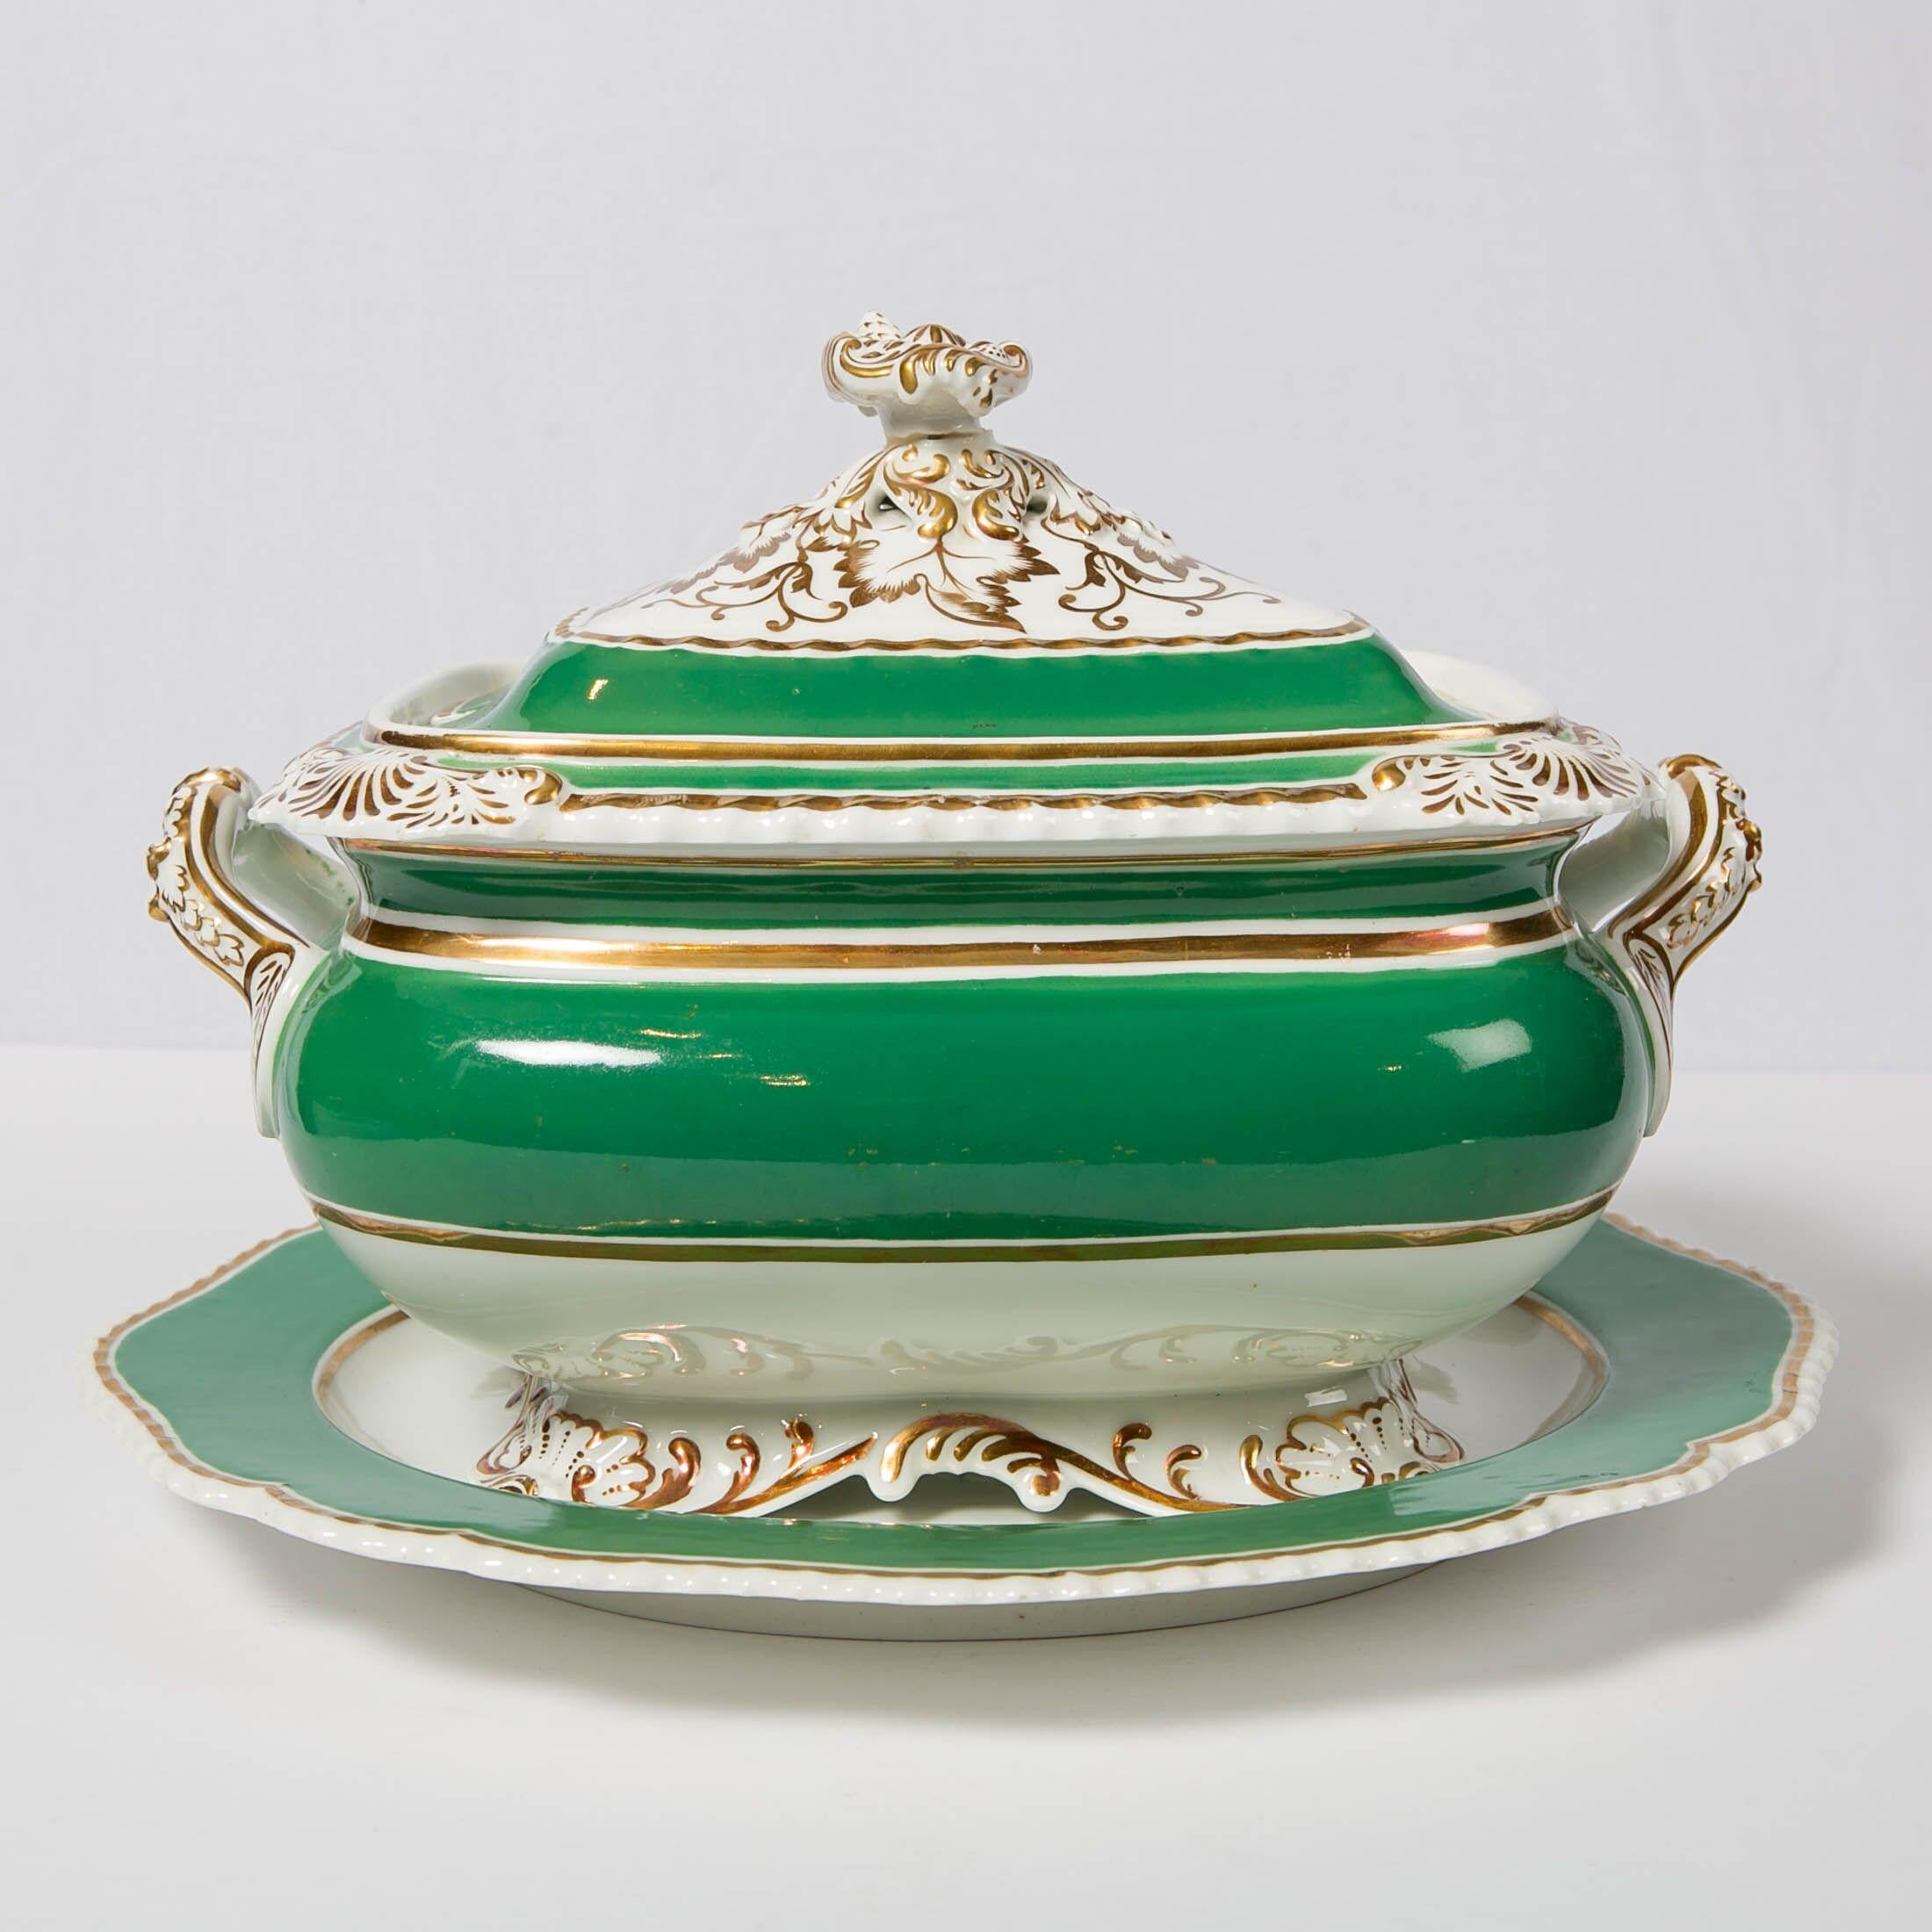 Regency Chamberlains Worcester Green Soup Tureen Made in England, circa 1825